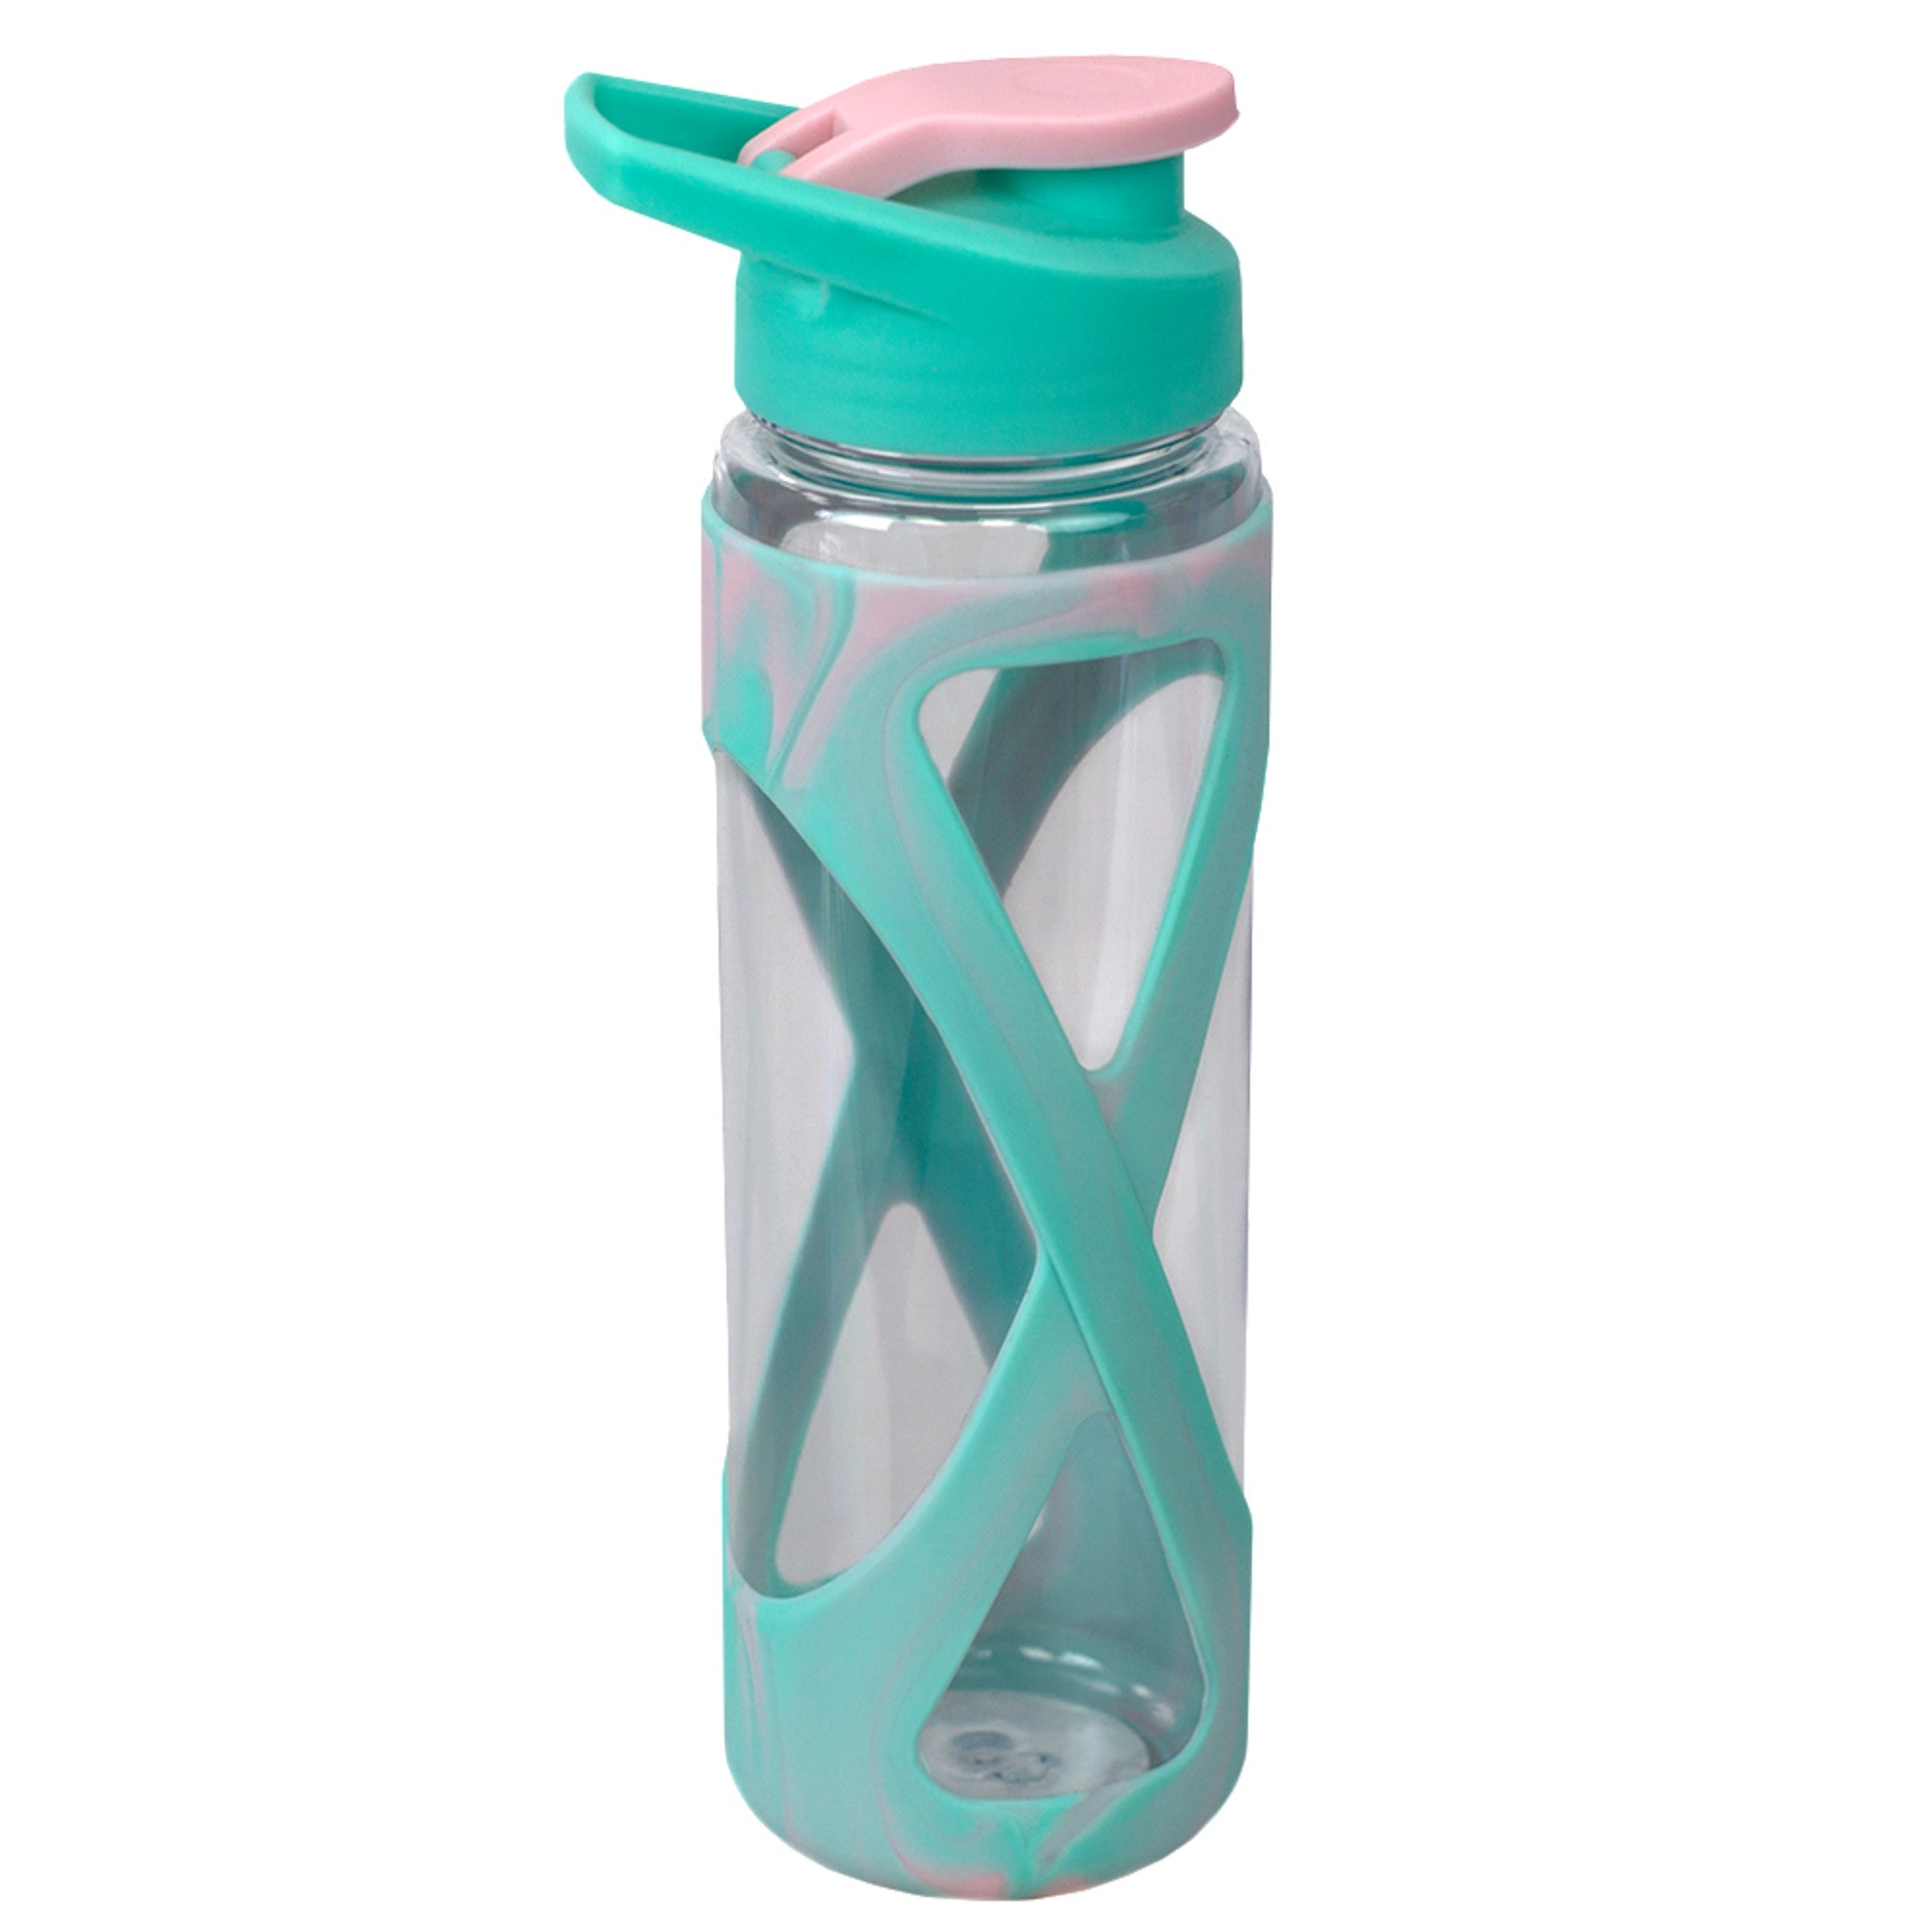 Home Basics 17 oz. Silicone Sleeve Water Bottle - Assorted Colors